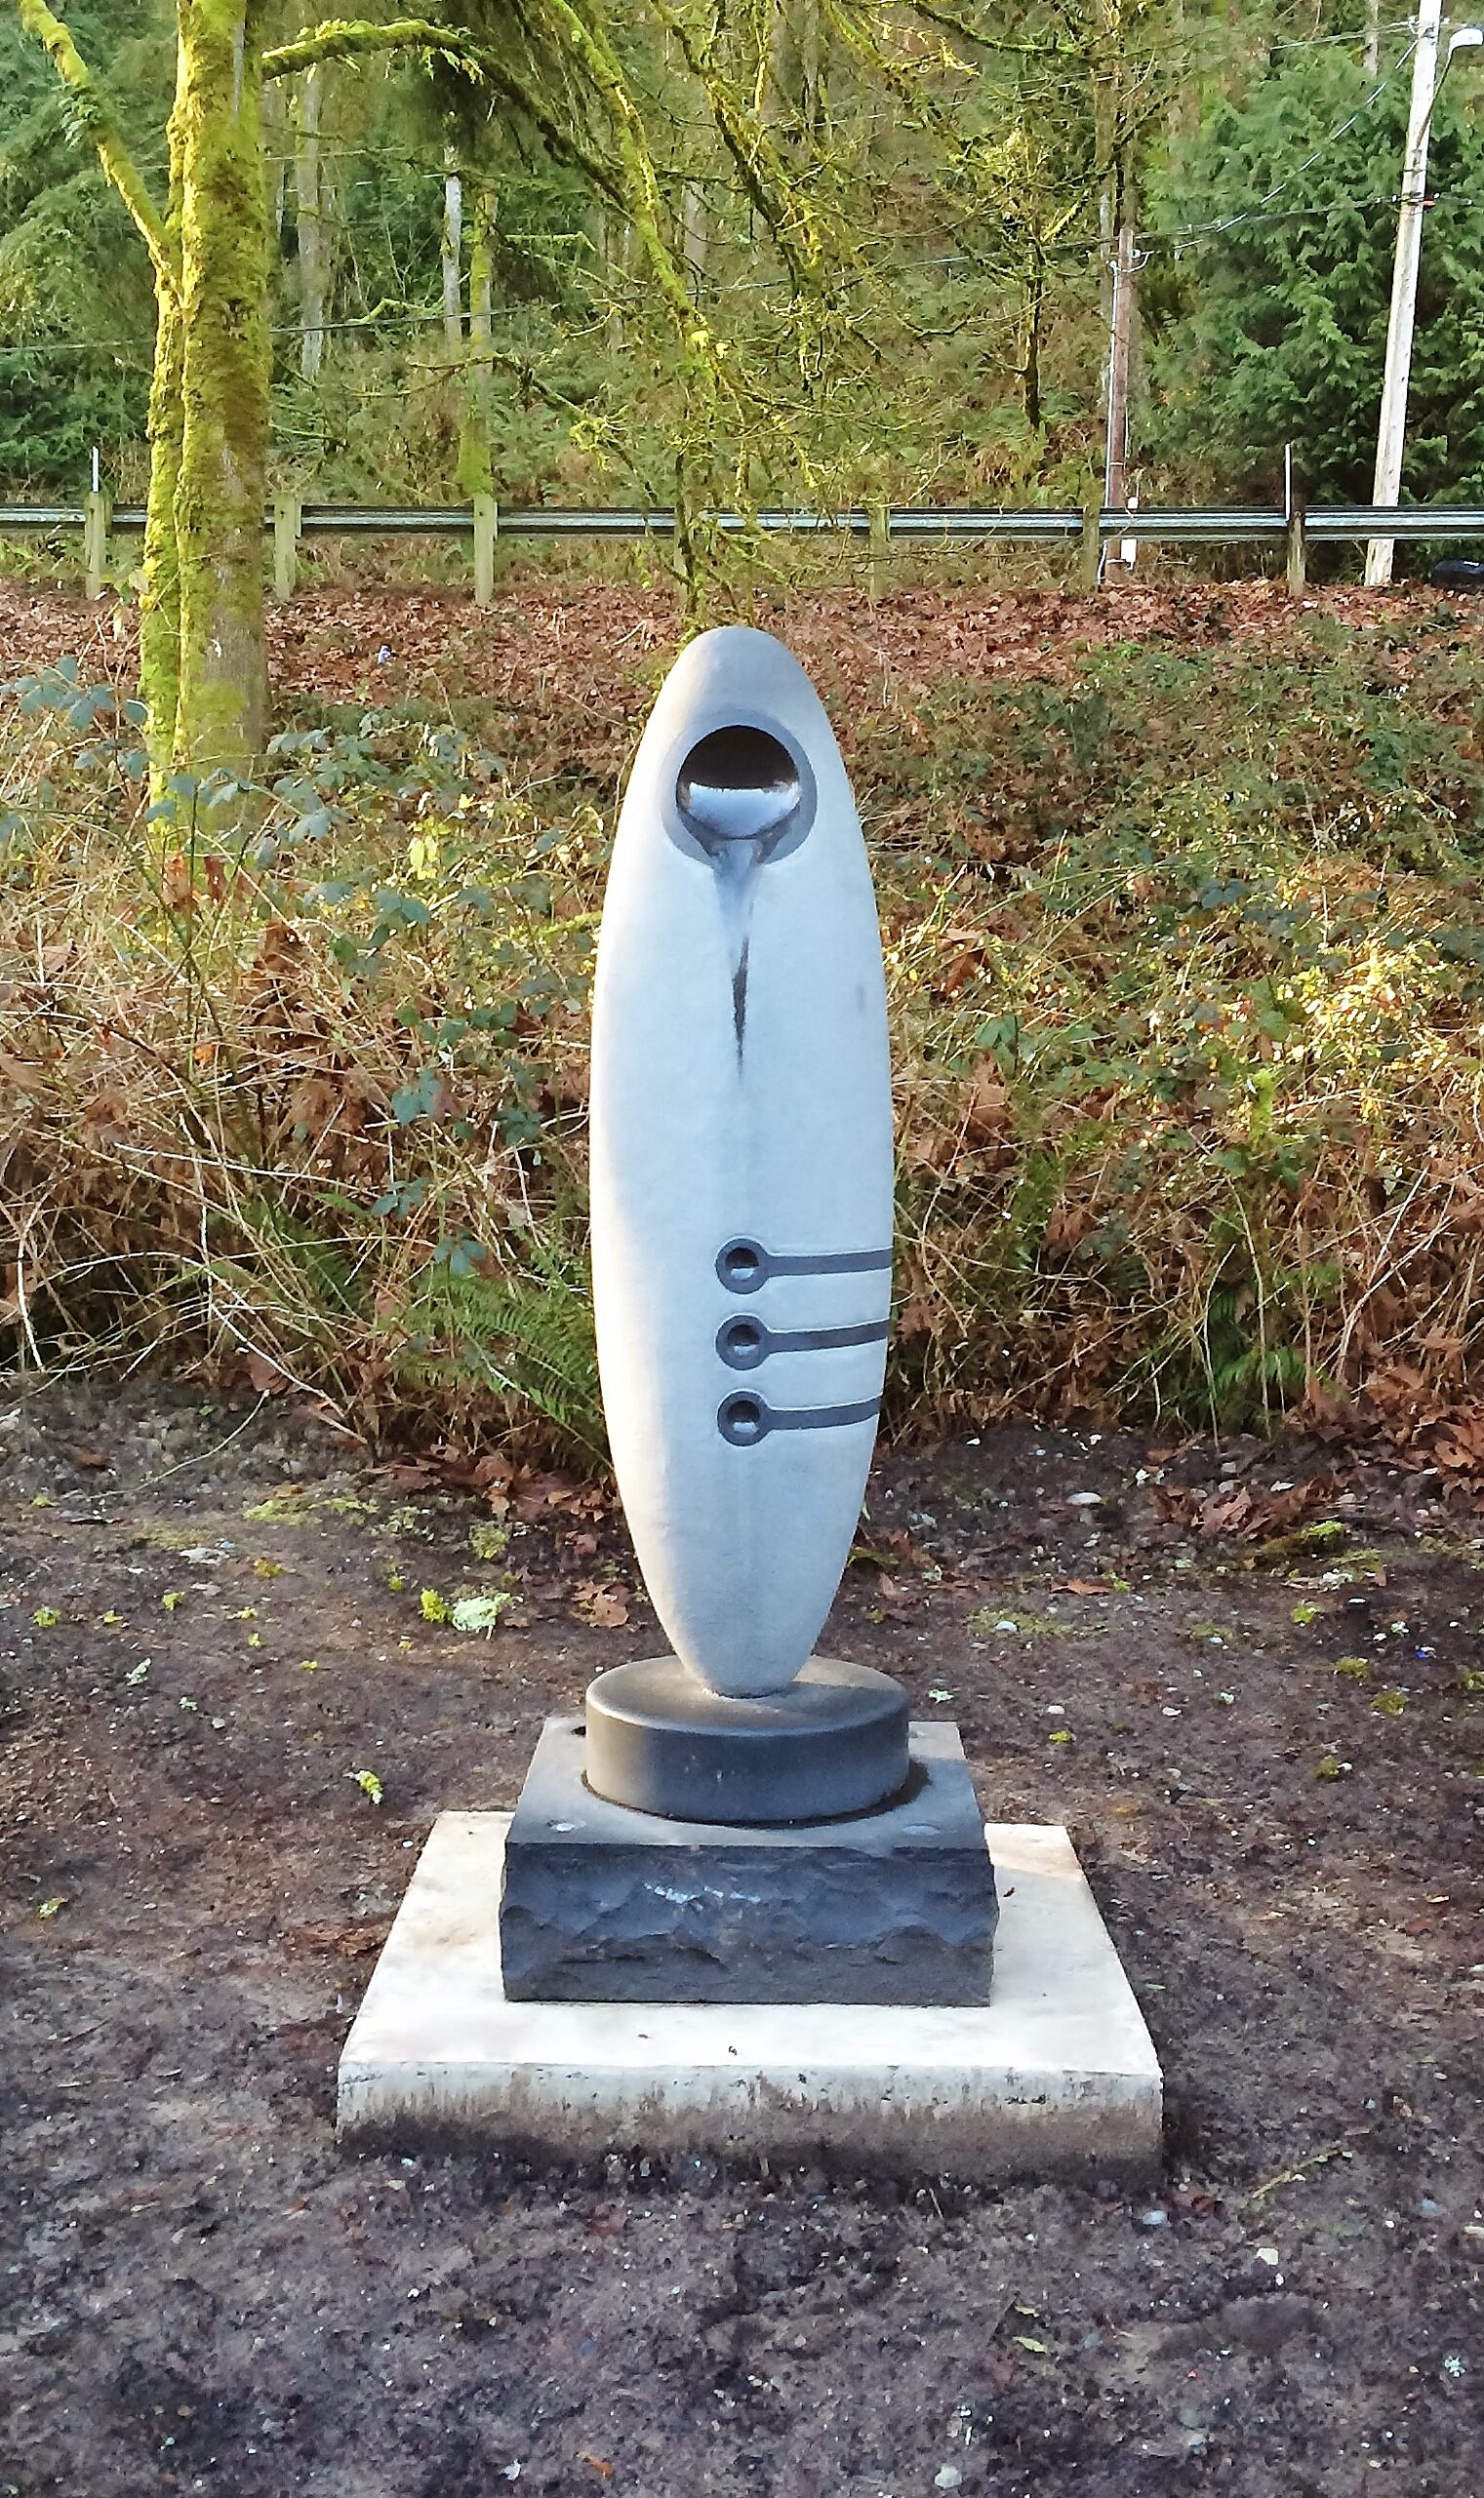 “Graceful Elegance”, Columbia basalt, 6’ tall, 2016, installed at Newport Way Library in Bellevue, Washington. This was for a memorial of a lady that had passed away. The redundant title is based on the most frequently used words when I conducted several interviews with the deceased friends and family.